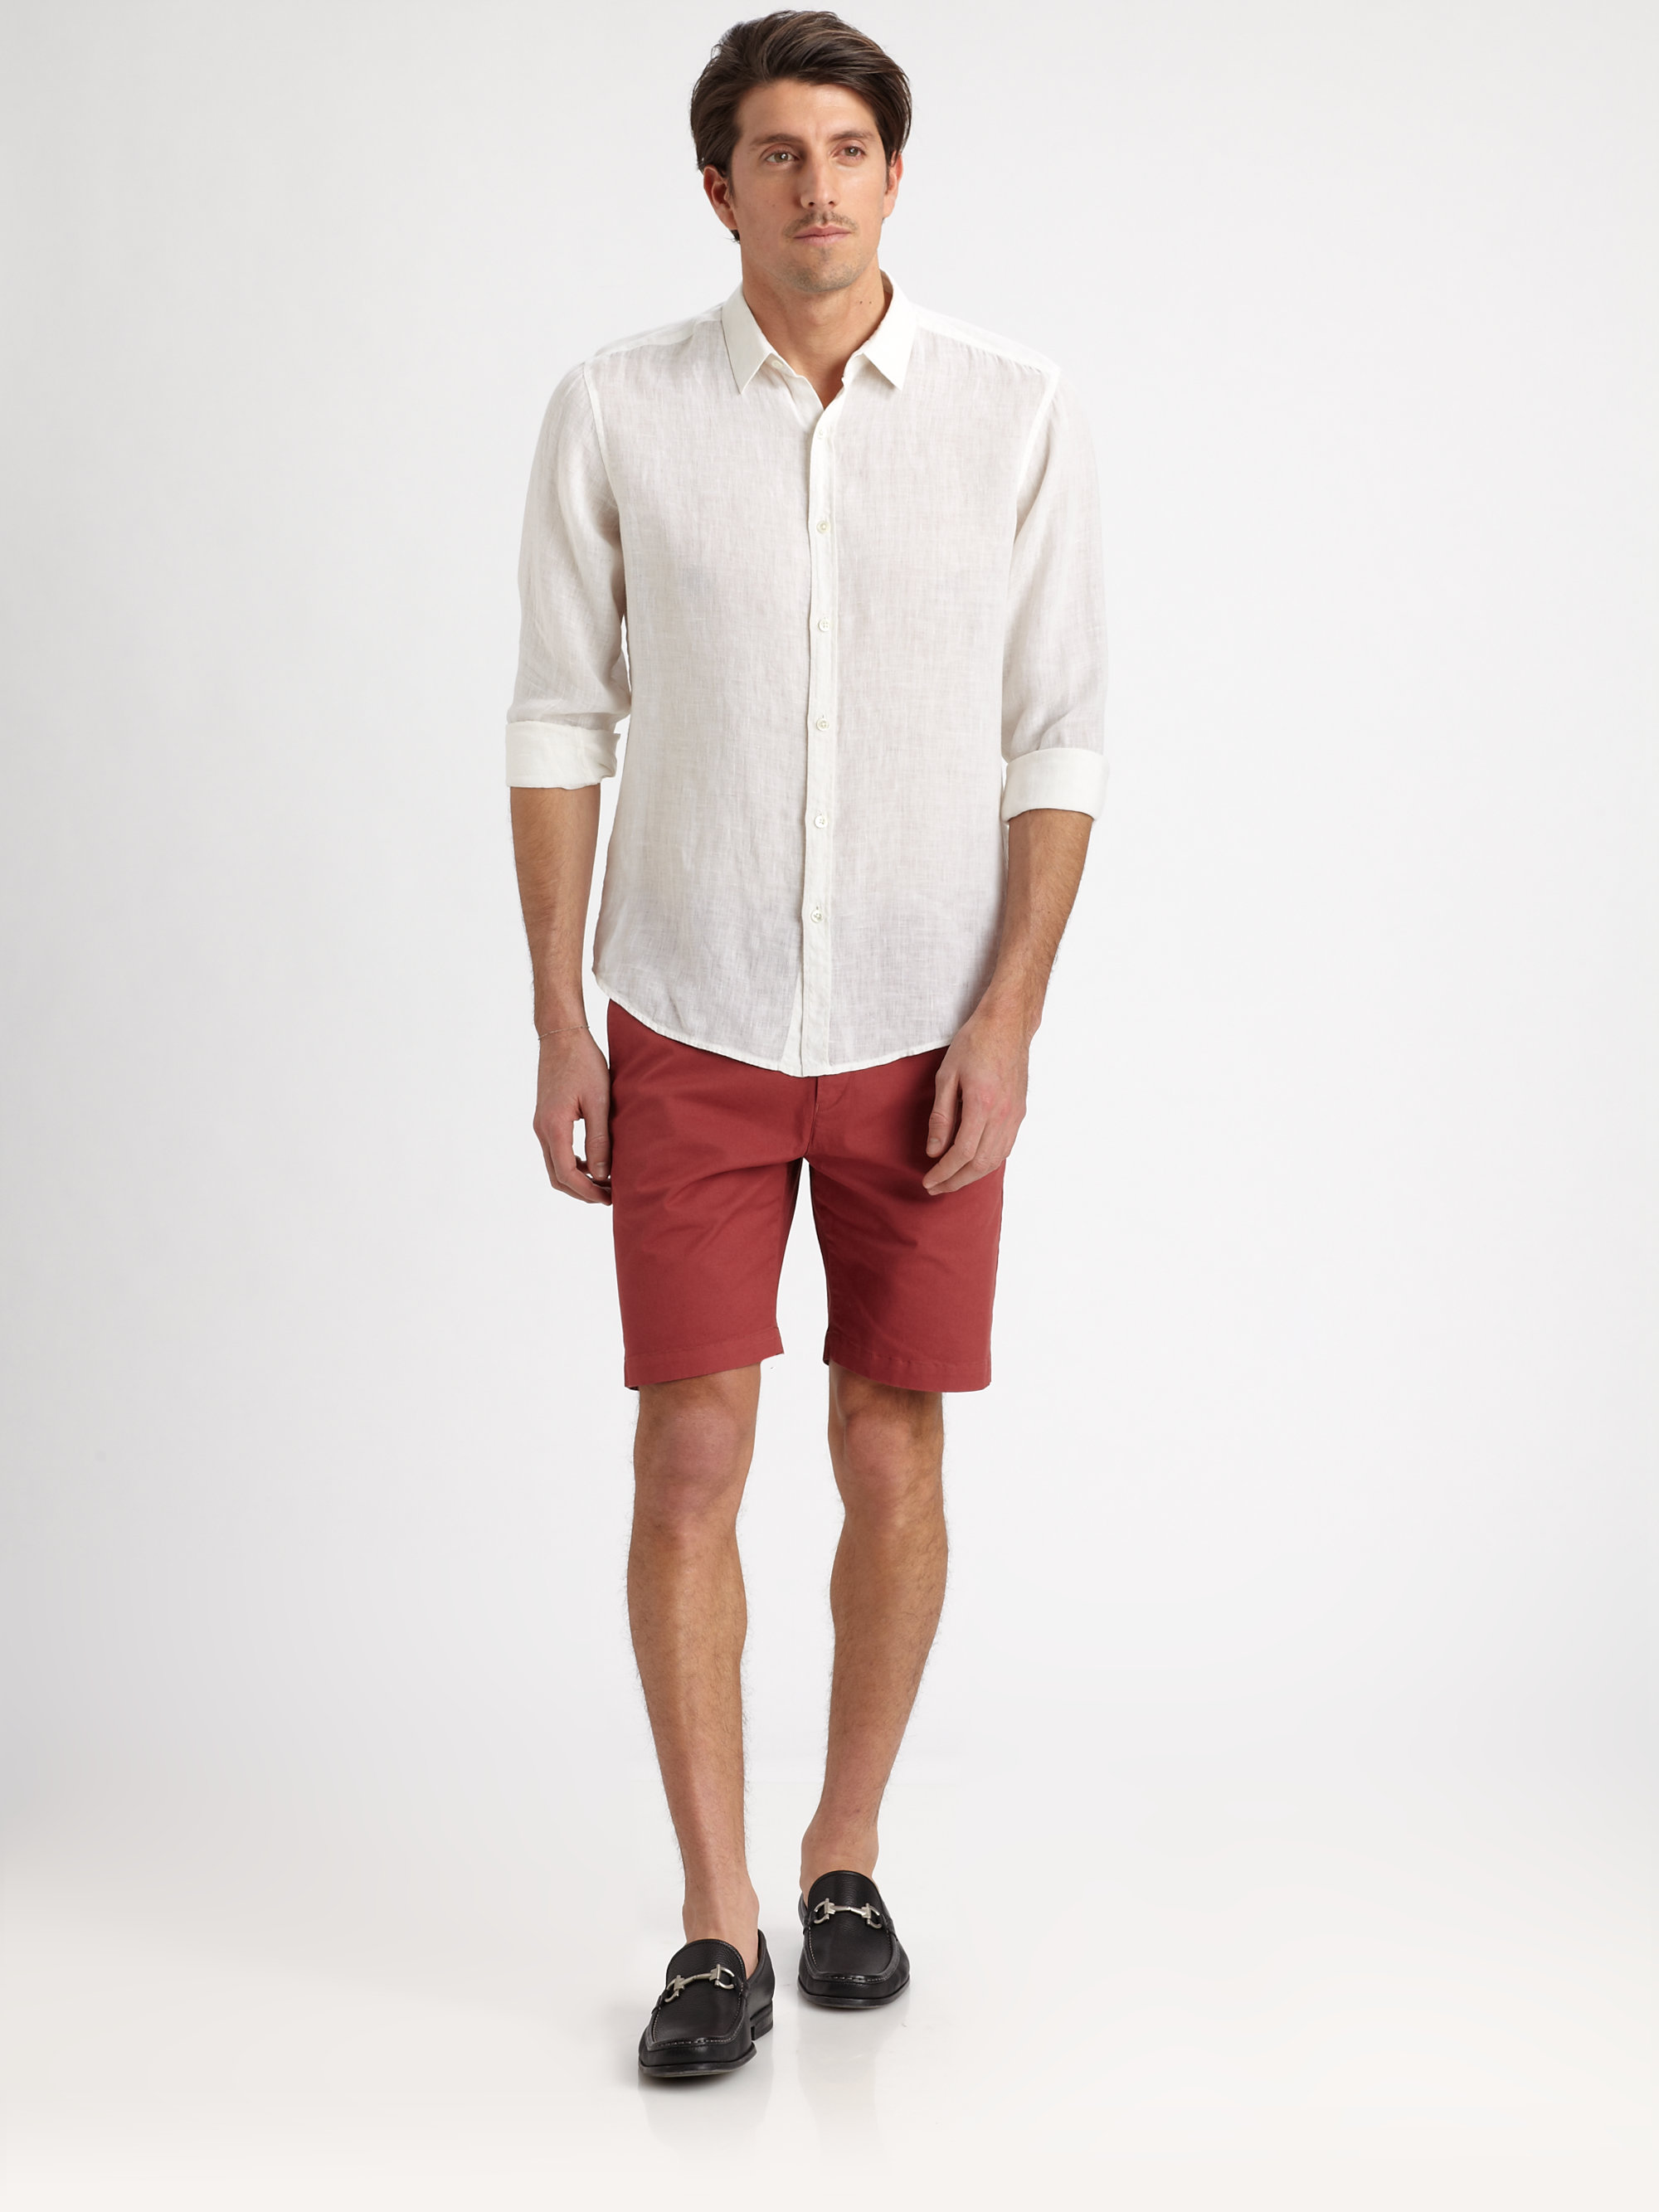 Lyst - Theory Zaine Stretch Cotton Shorts in Red for Men